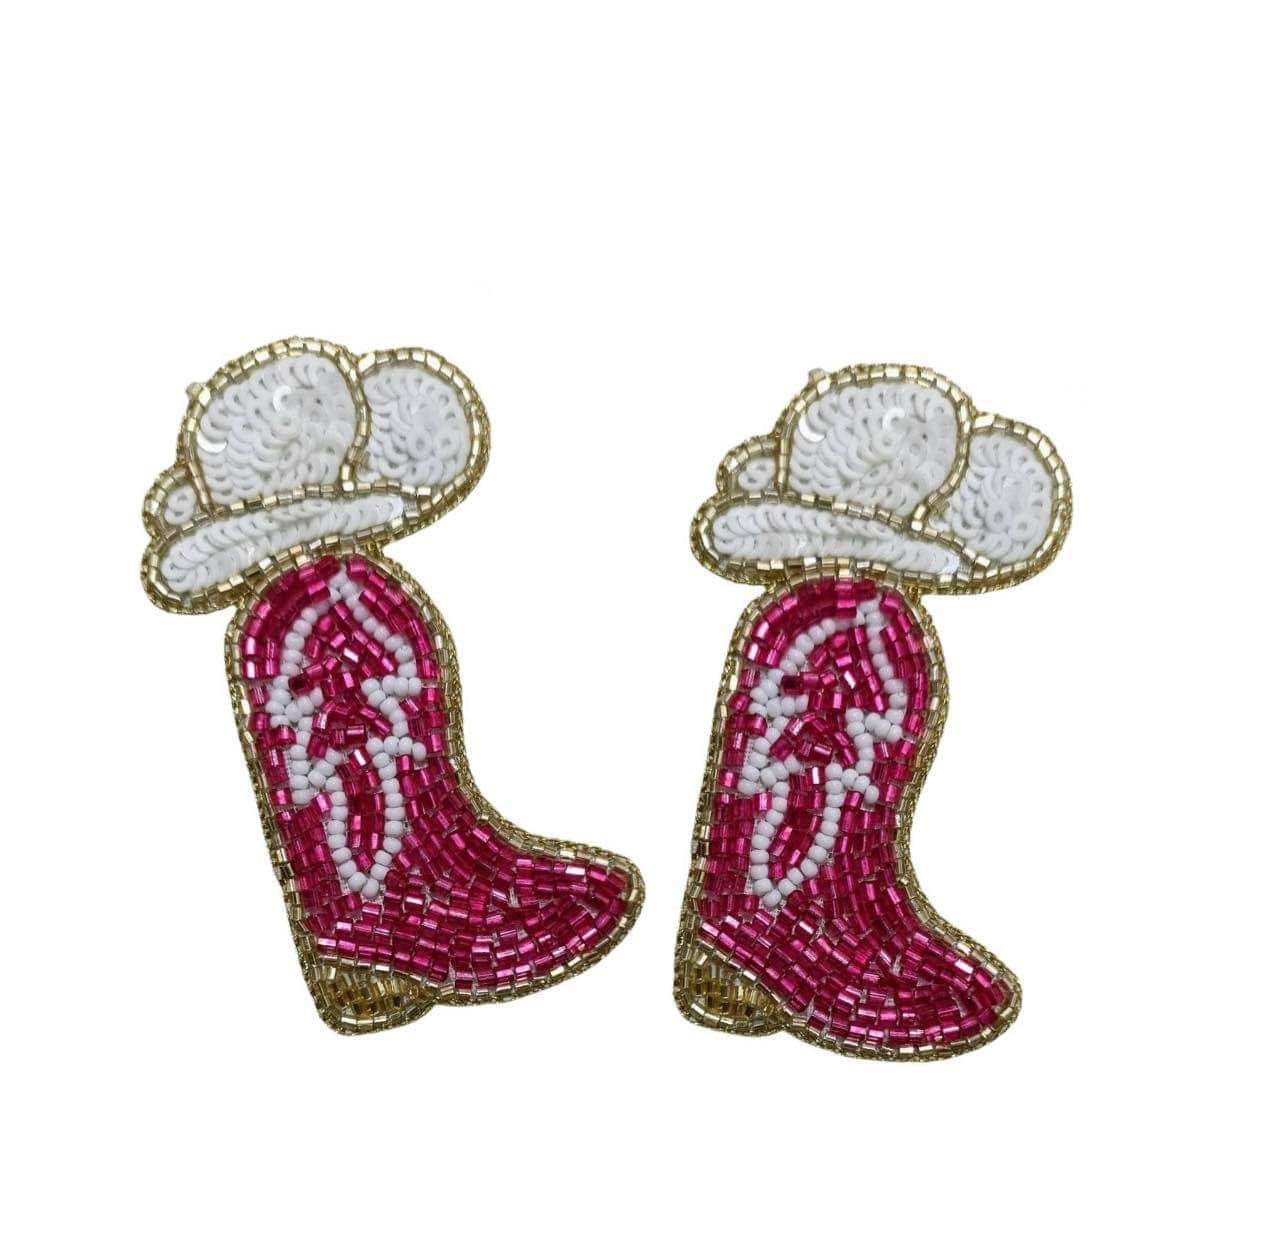 COWGIRL EARRINGS - Baby Bums Clothing 